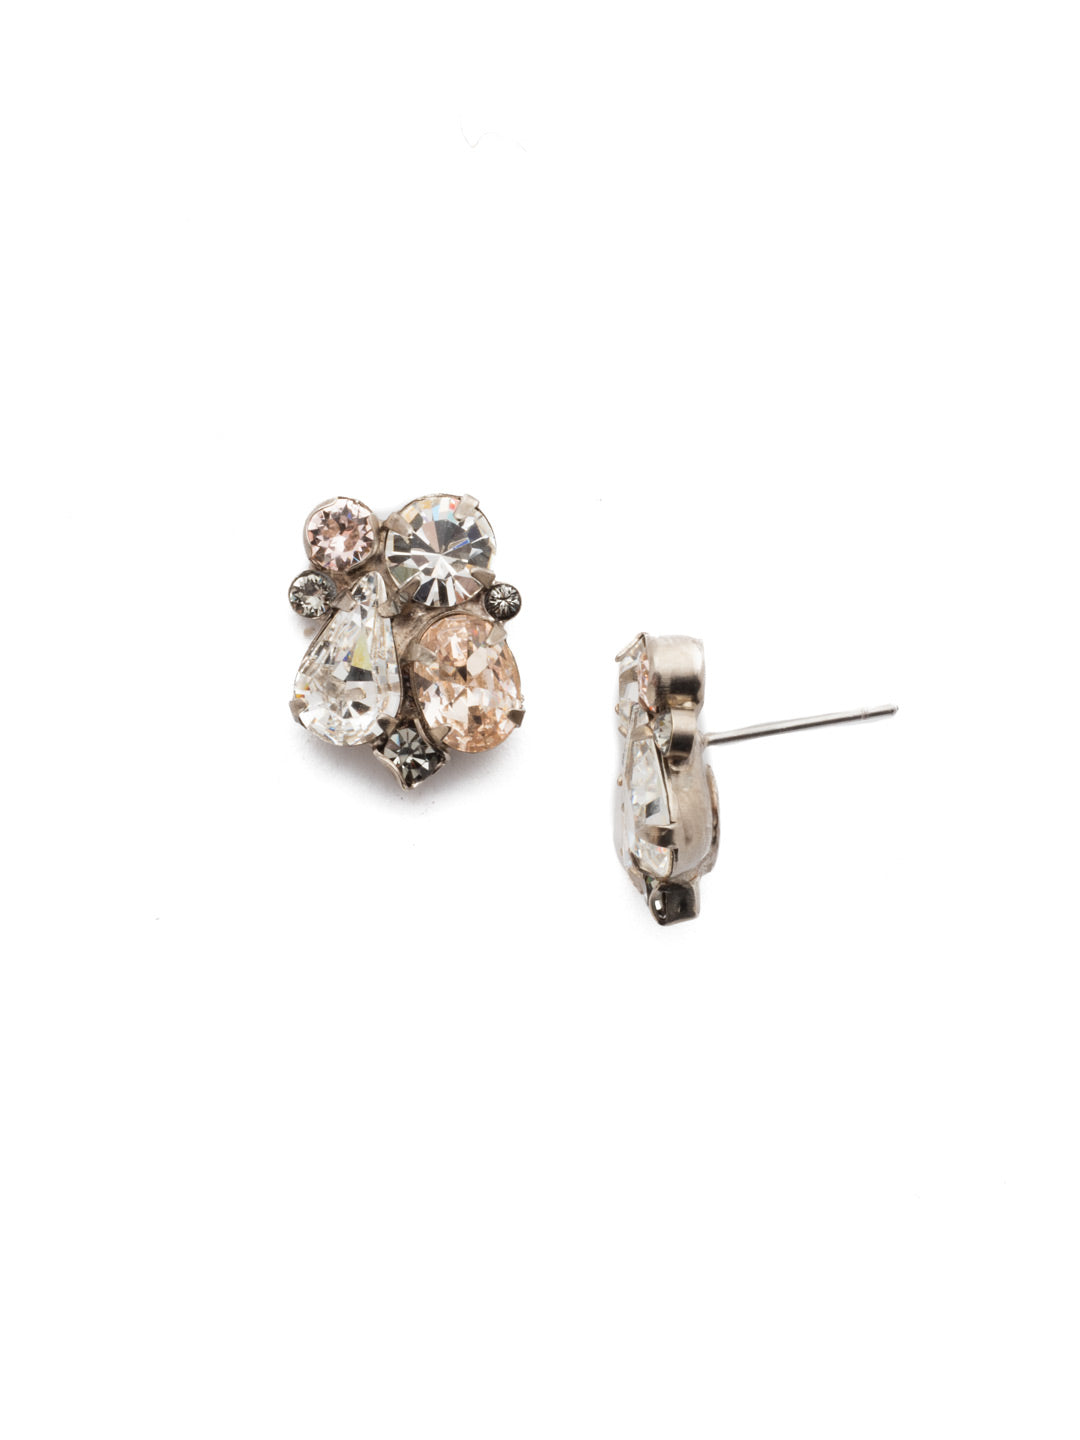 Daffodil Stud Earrings - EDU5ASSNB - <p>Features a cluster of crystals cut in pear, round, and oval shapes with a stud post. From Sorrelli's Snow Bunny collection in our Antique Silver-tone finish.</p>